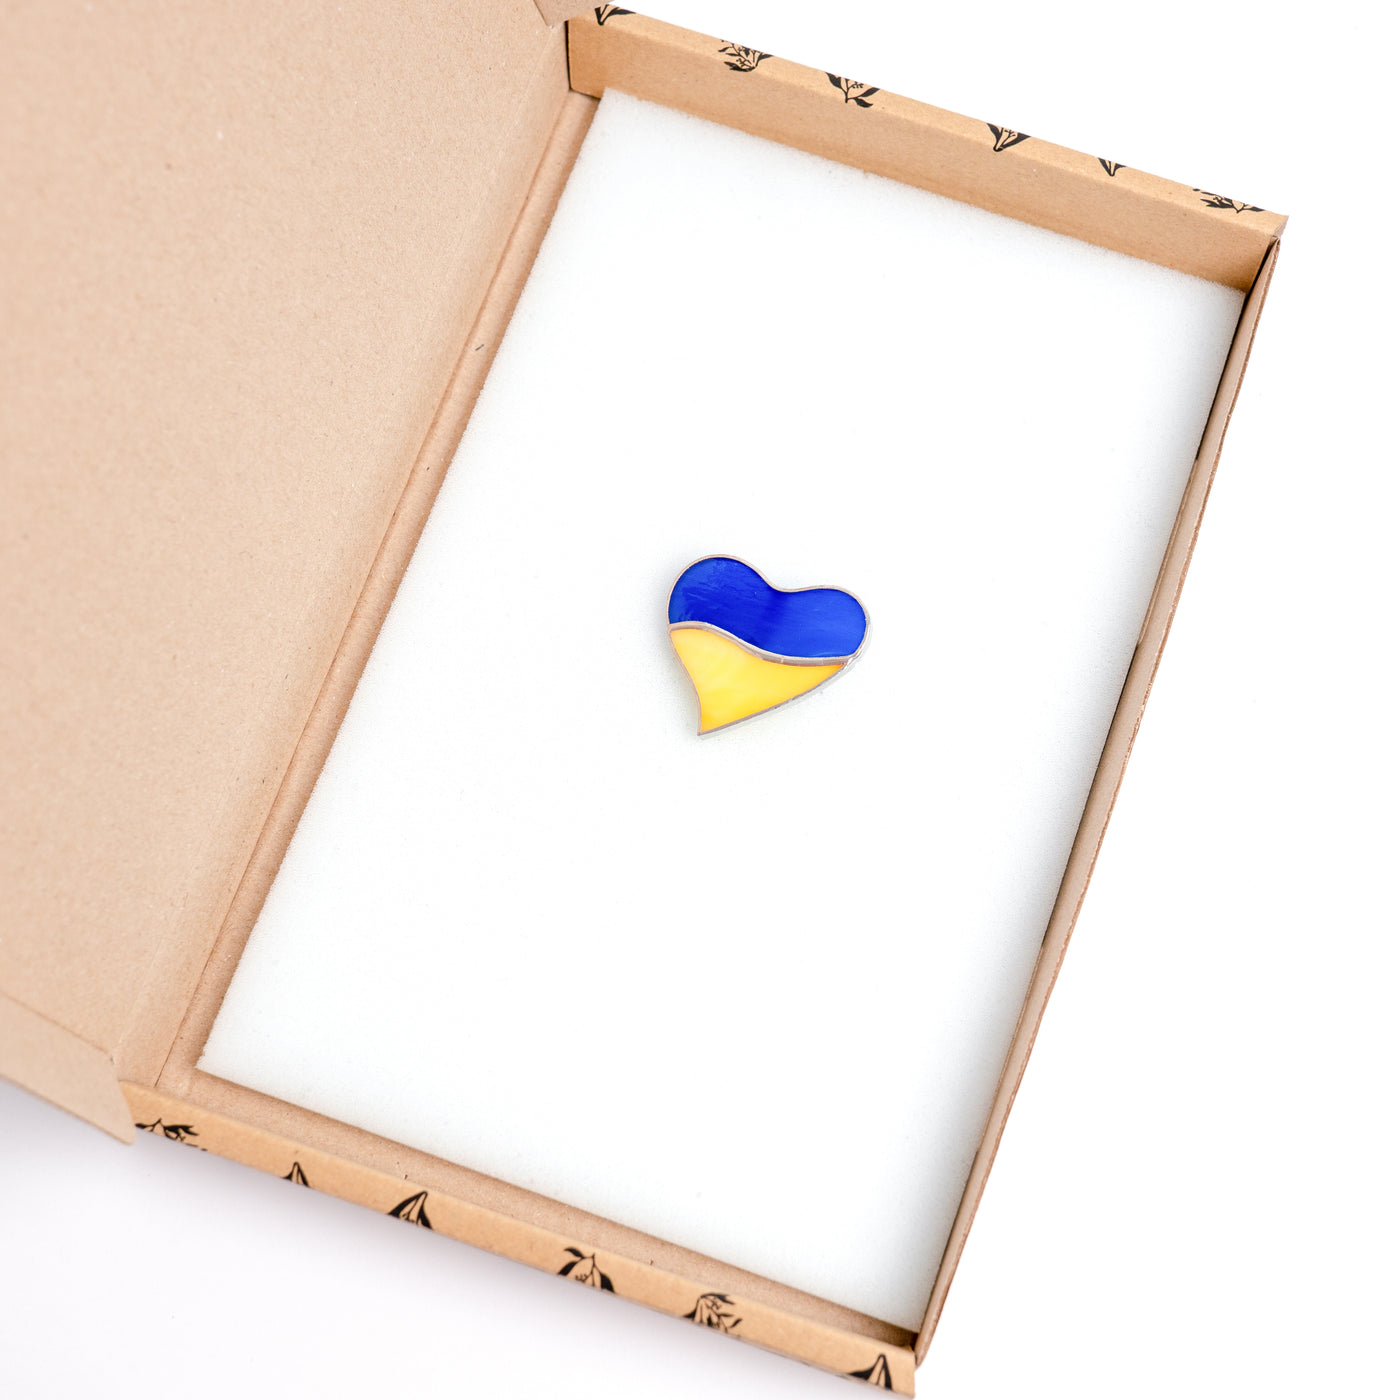 Stained glass Ukrainian heart pin in a brand box